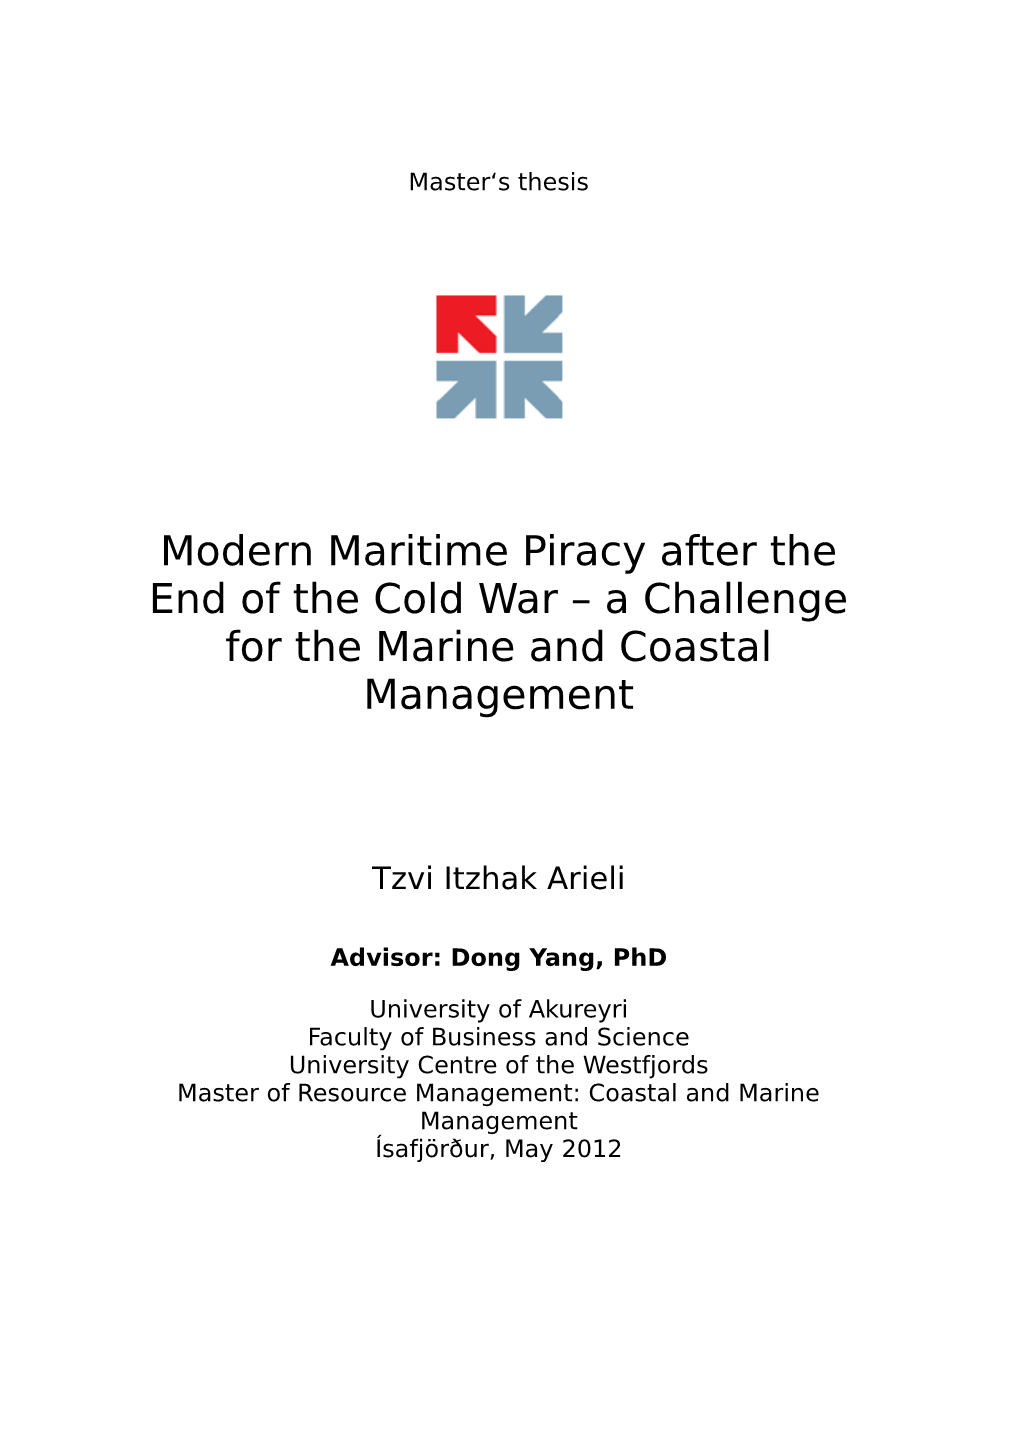 Modern Maritime Piracy After the End of the Cold War – a Challenge for the Marine and Coastal Management